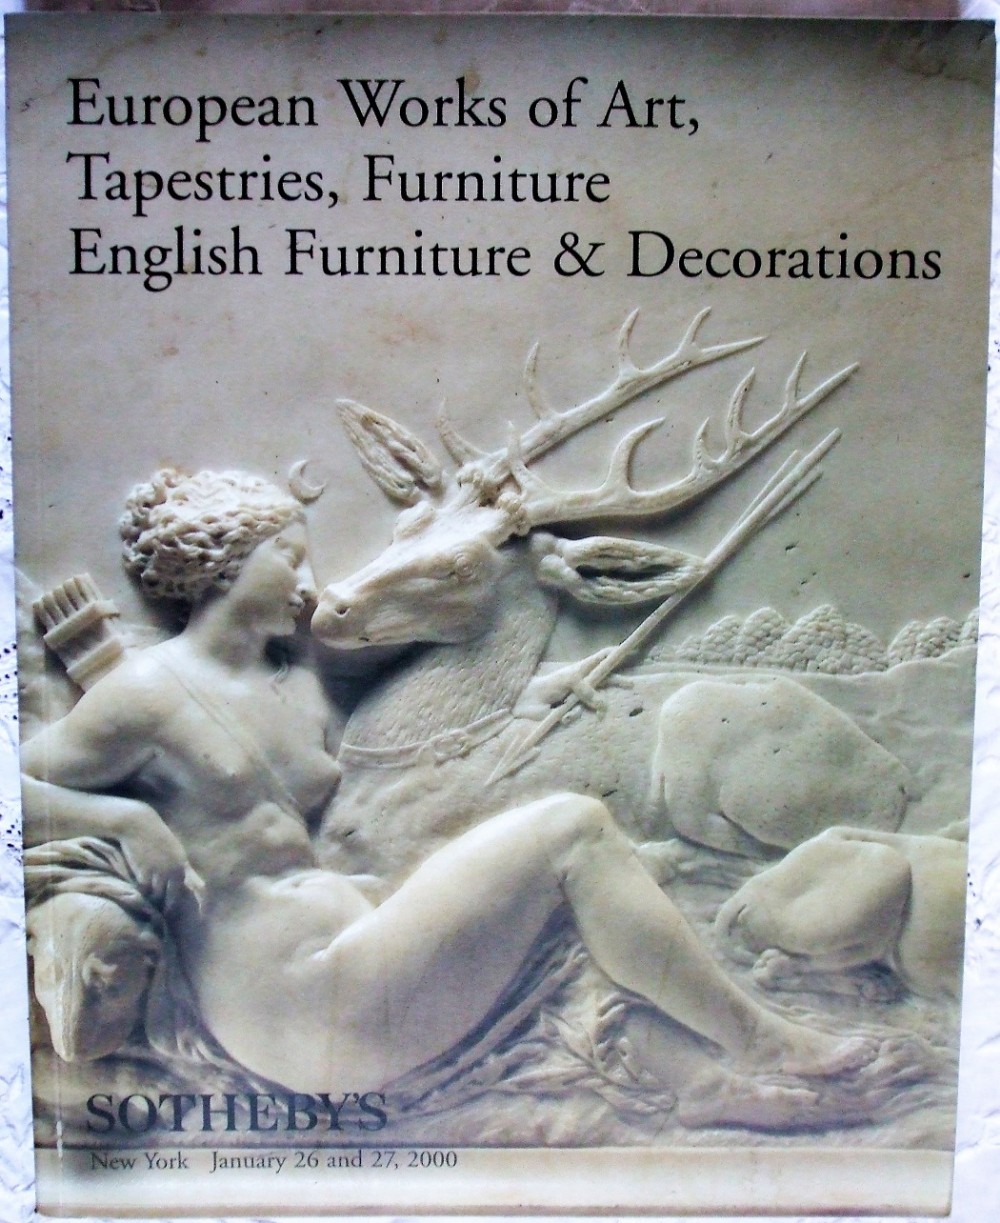 sotheby's european works of art tapestries furniture english furniture and decorations new york 26 27 01 2000